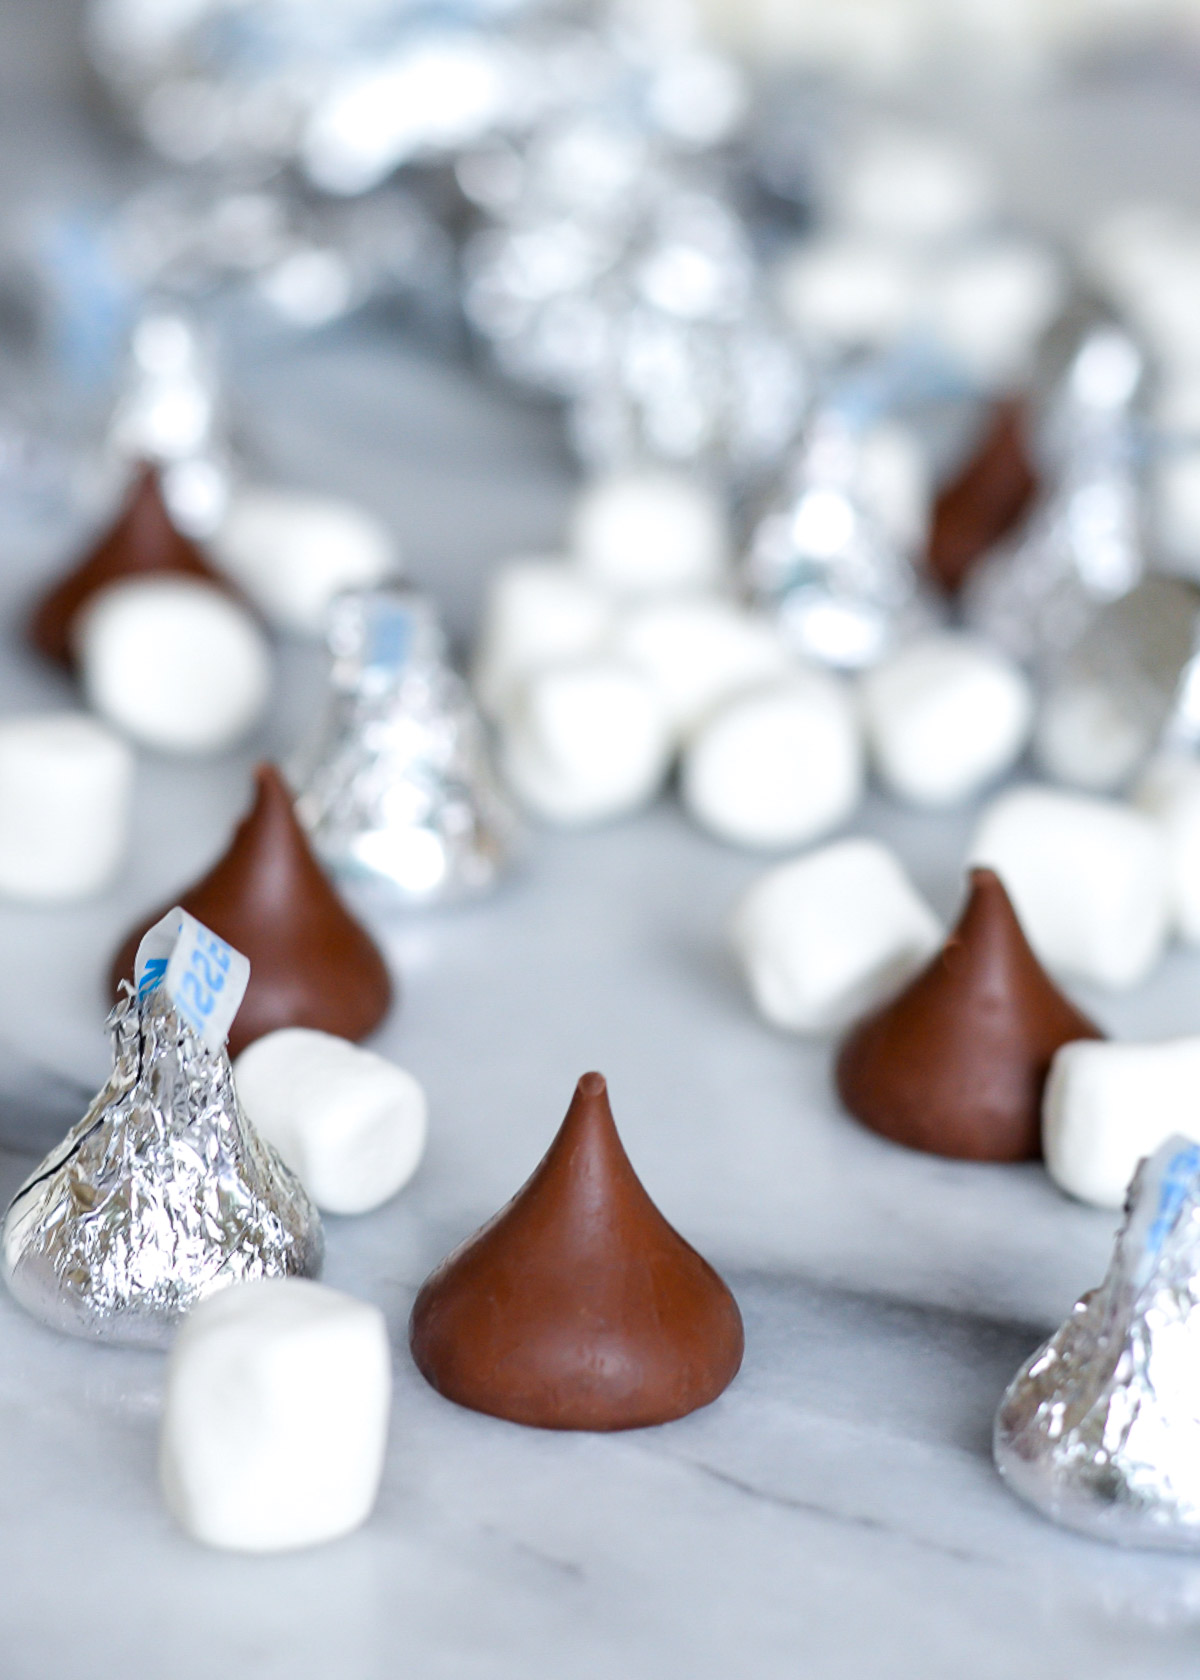 Hershey's kisses, wrapped and unwrapped